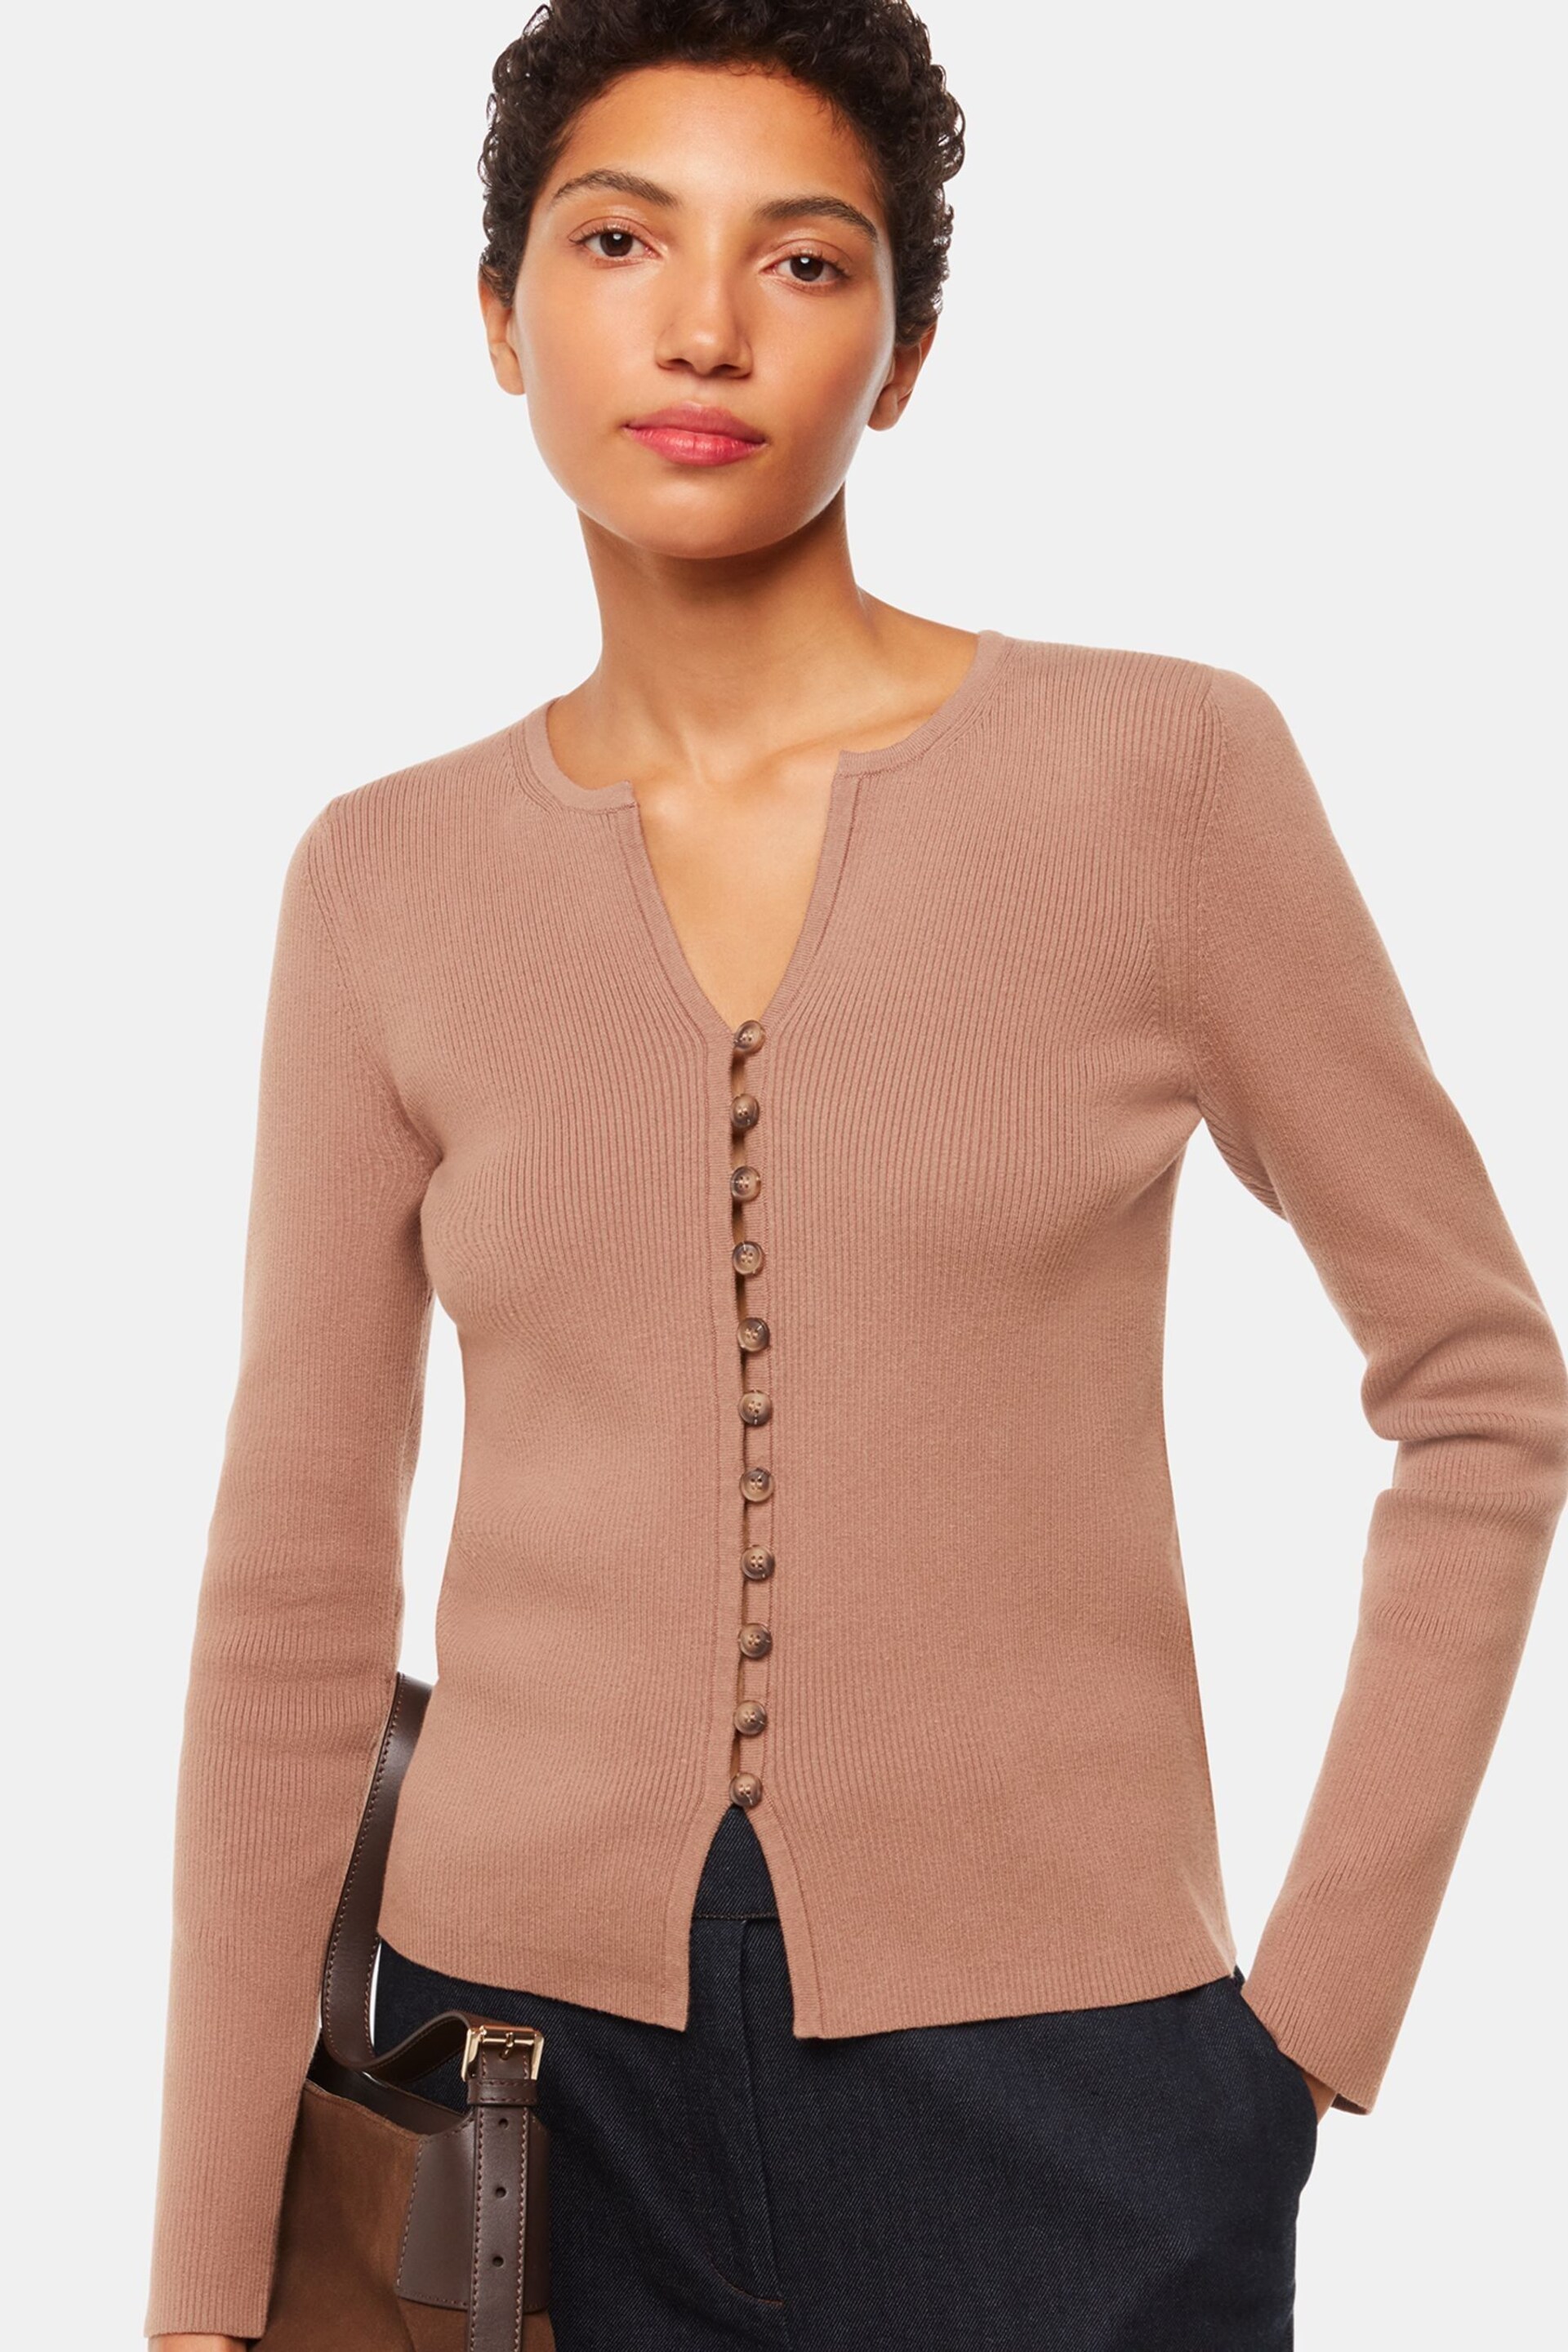 Whistles Natural Ribbed Button Through Cardigan - Image 2 of 5